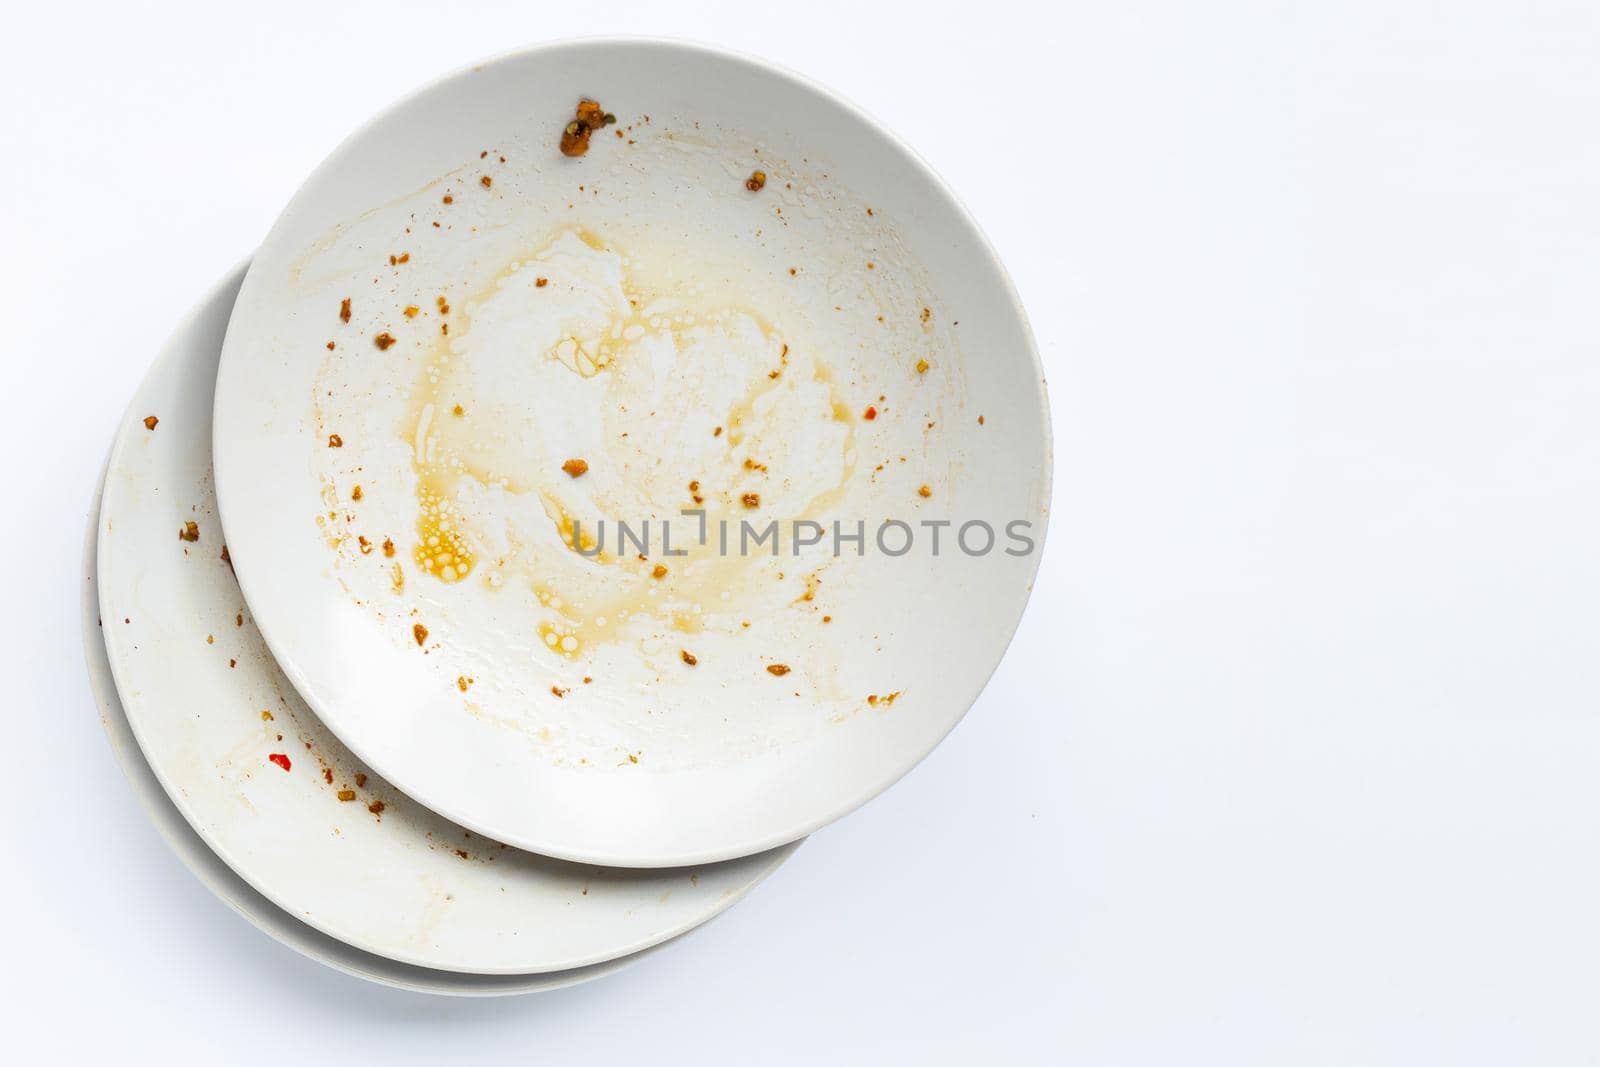 Dirty dishes on white background.